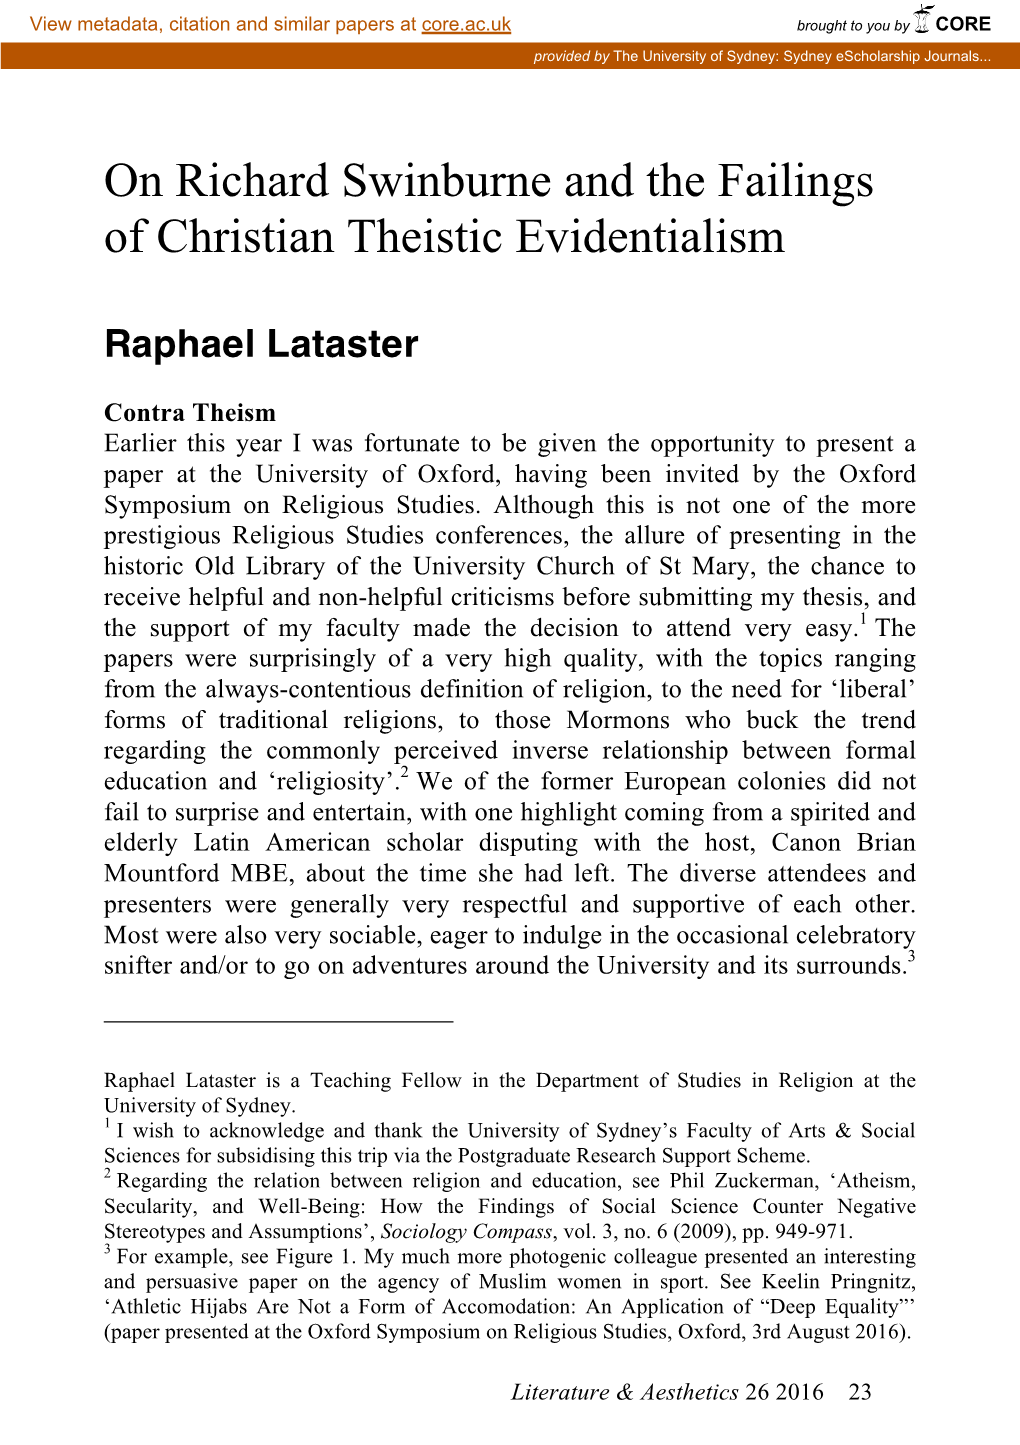 On Richard Swinburne and the Failings of Christian Theistic Evidentialism